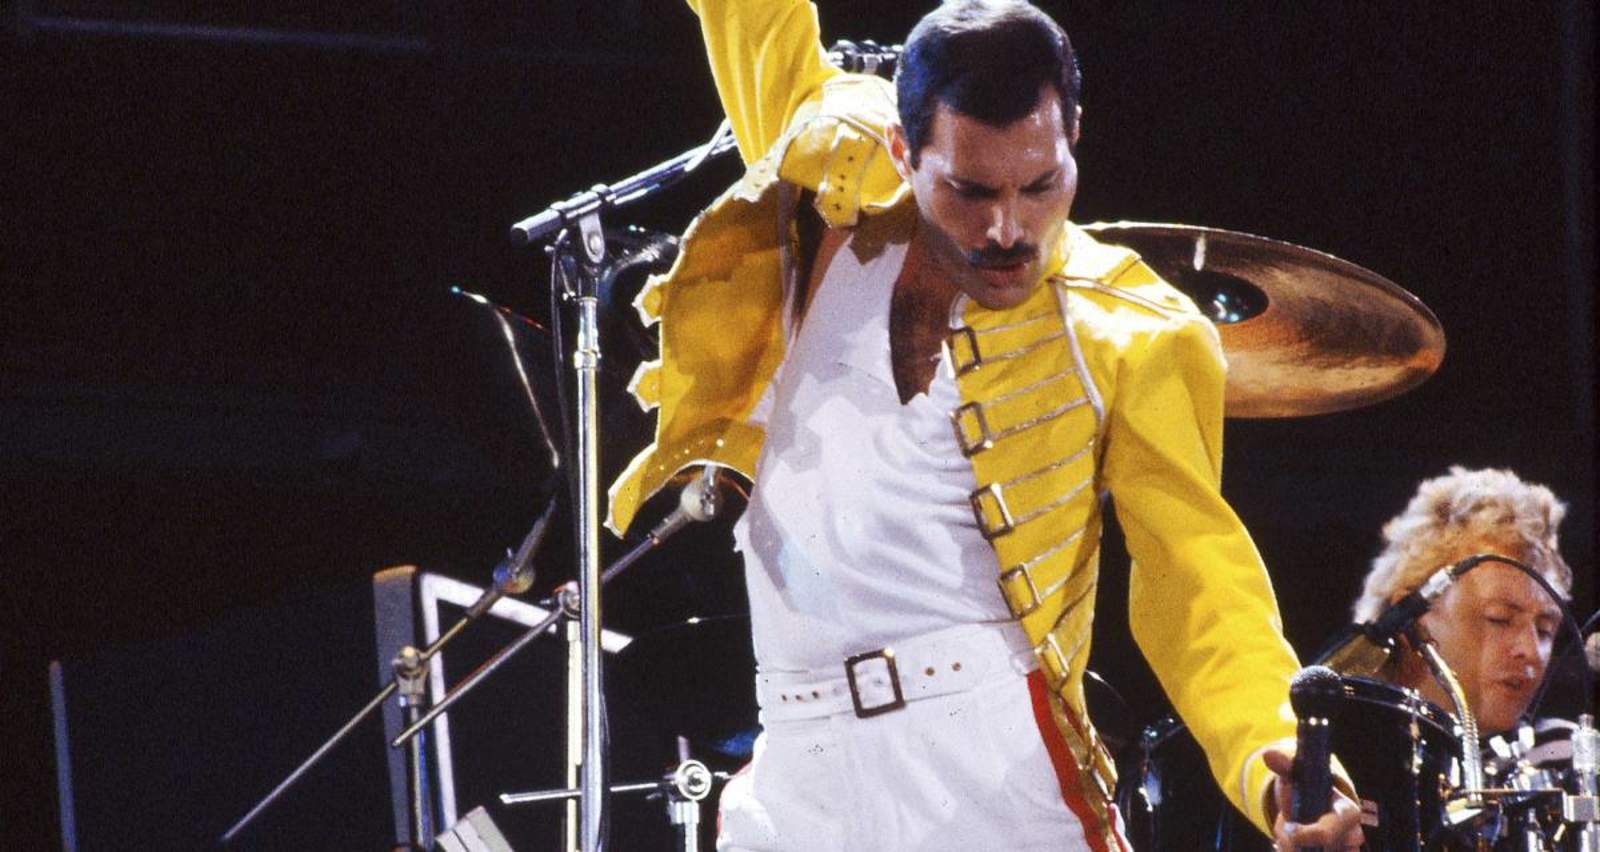 1991: Freddie Mercury, one of the icons of contemporary music, gives a last breath